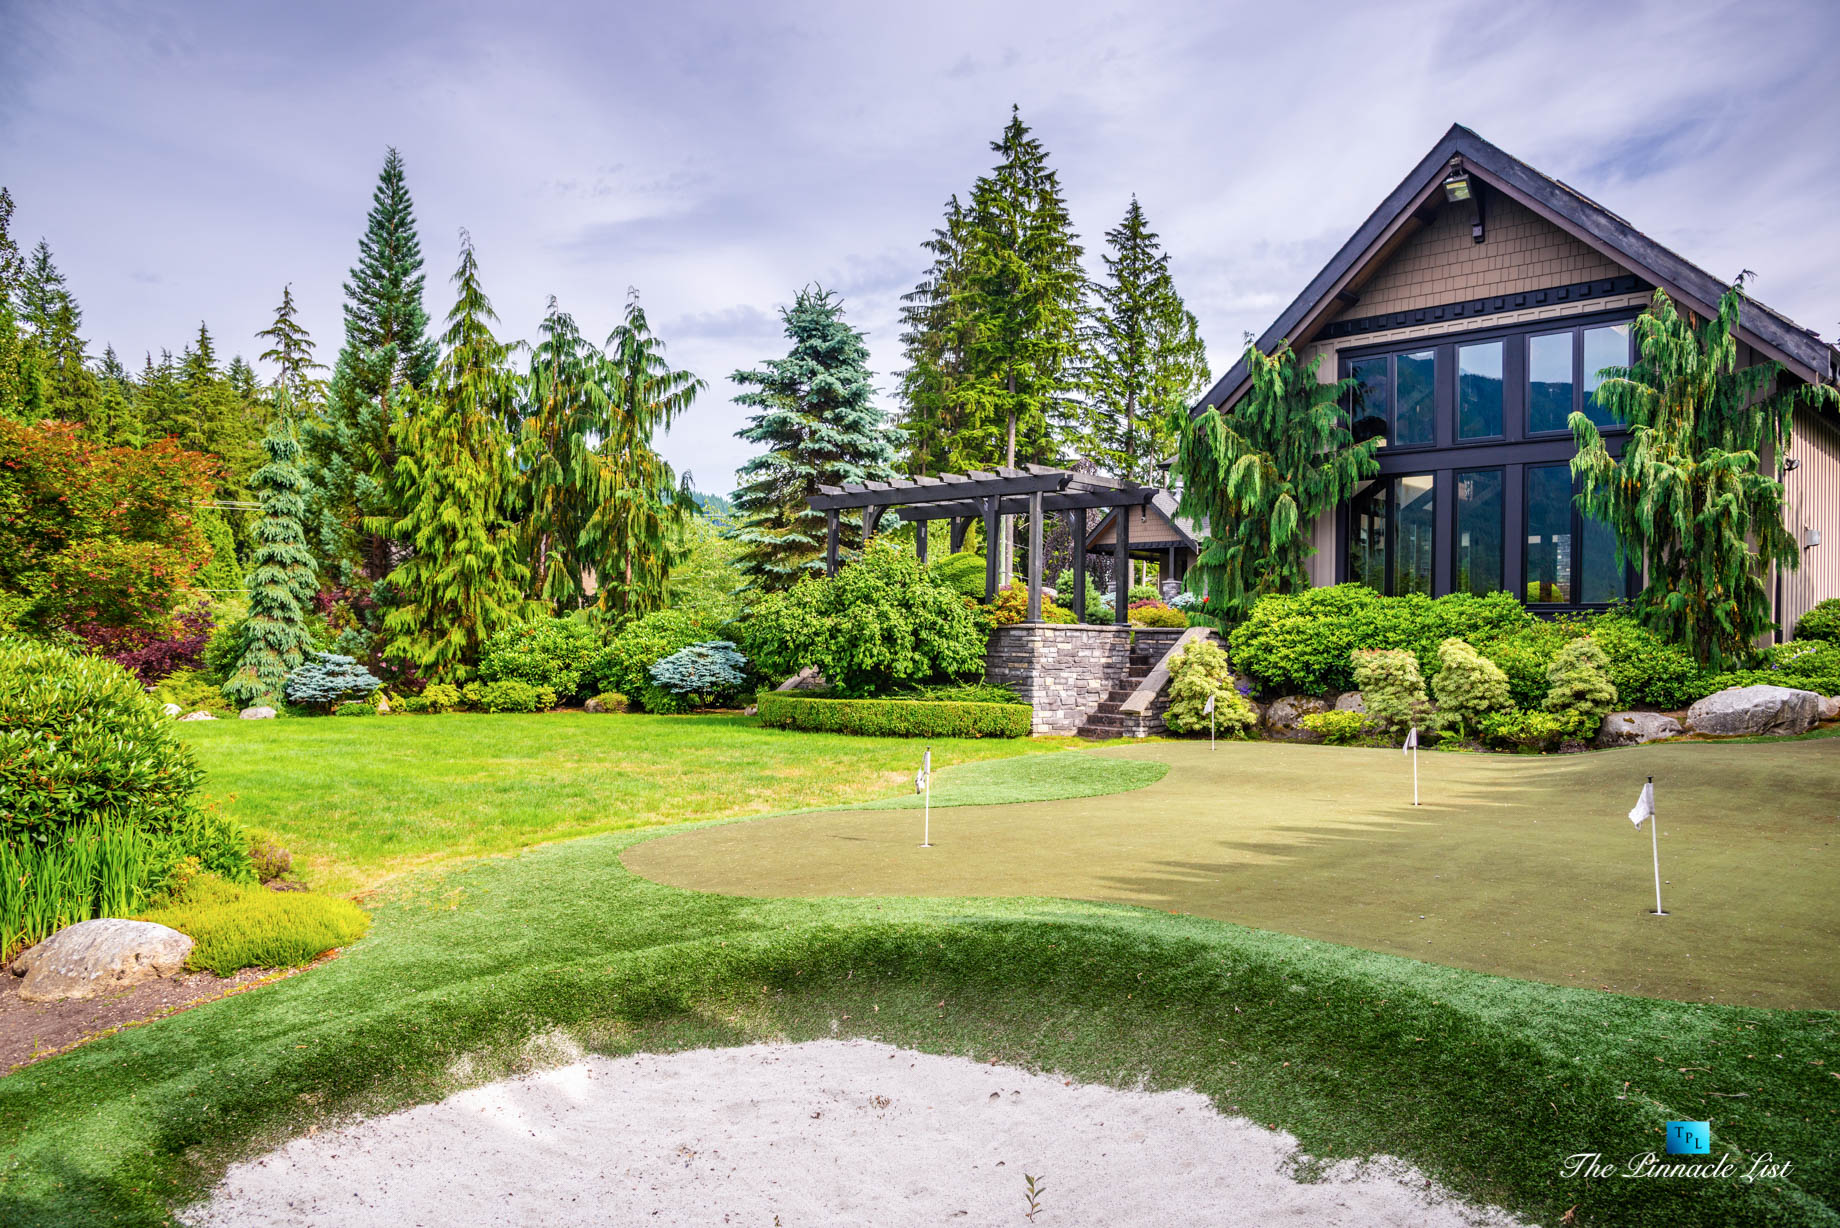 3053 Anmore Creek Way, Anmore, BC, Canada - Backyard Golf Putting Green Sand Trap Landscaping - Luxury Real Estate - Greater Vancouver Home